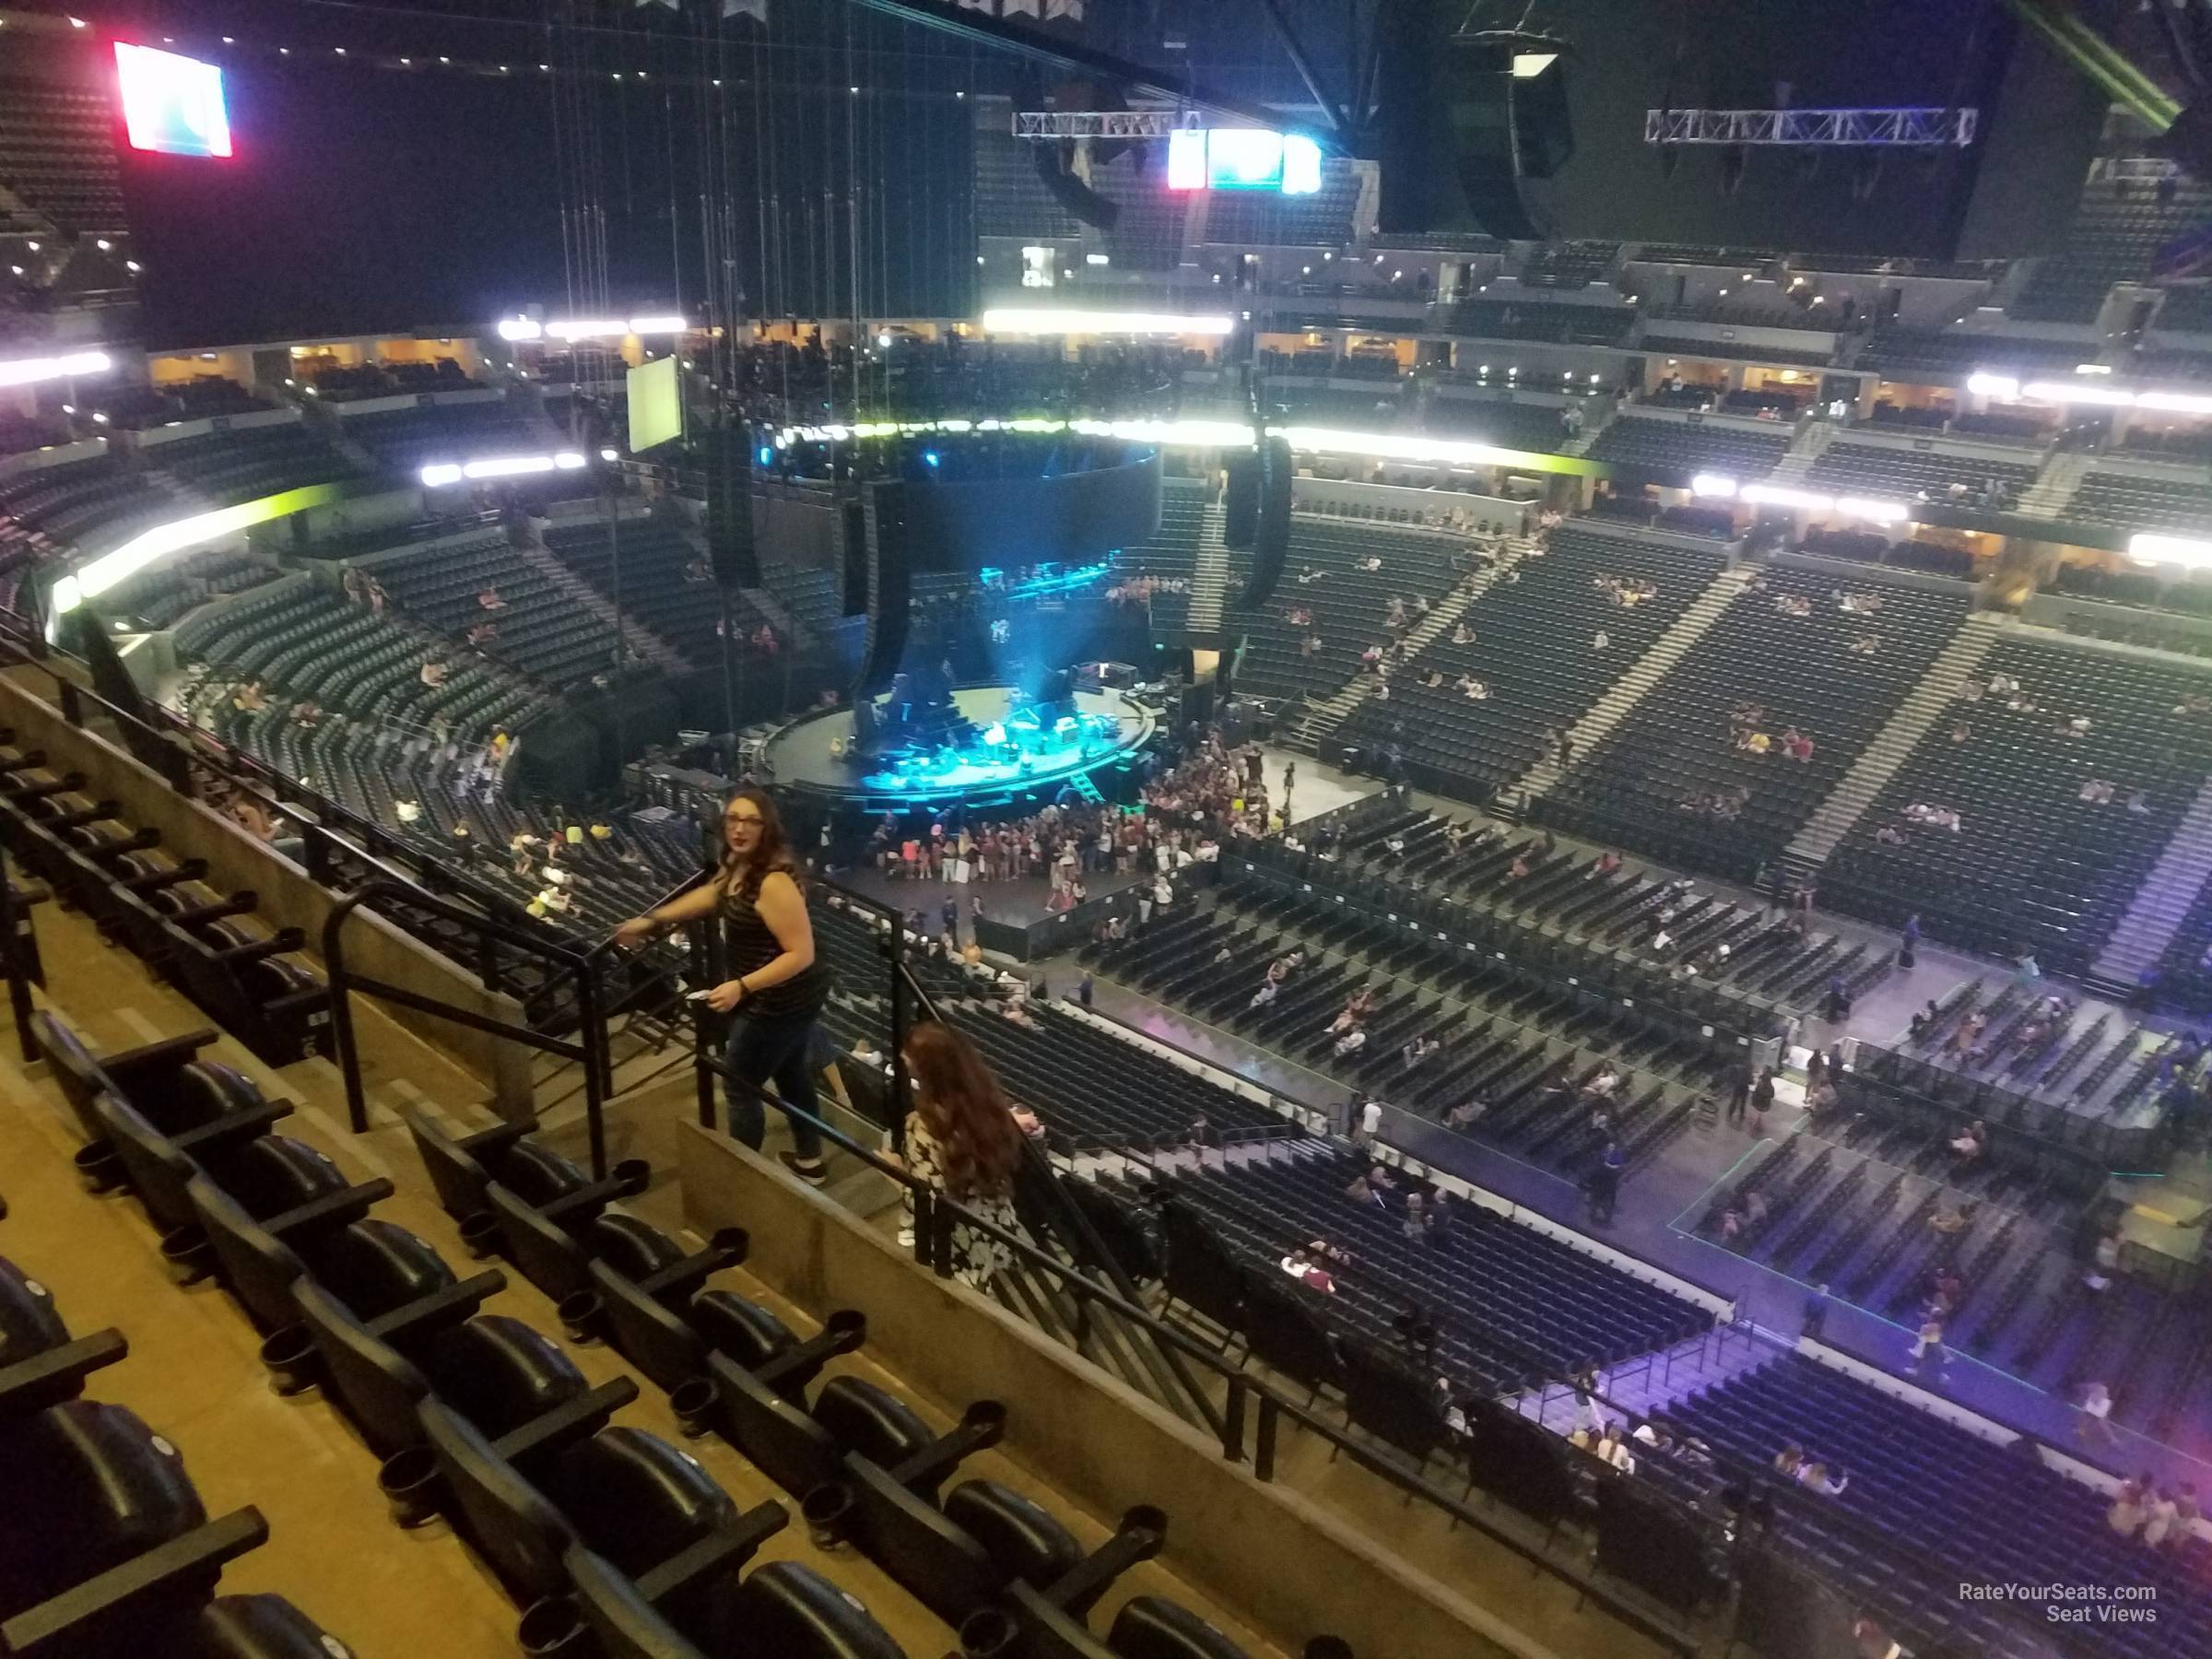 section 340, row 13 seat view  for concert - ball arena